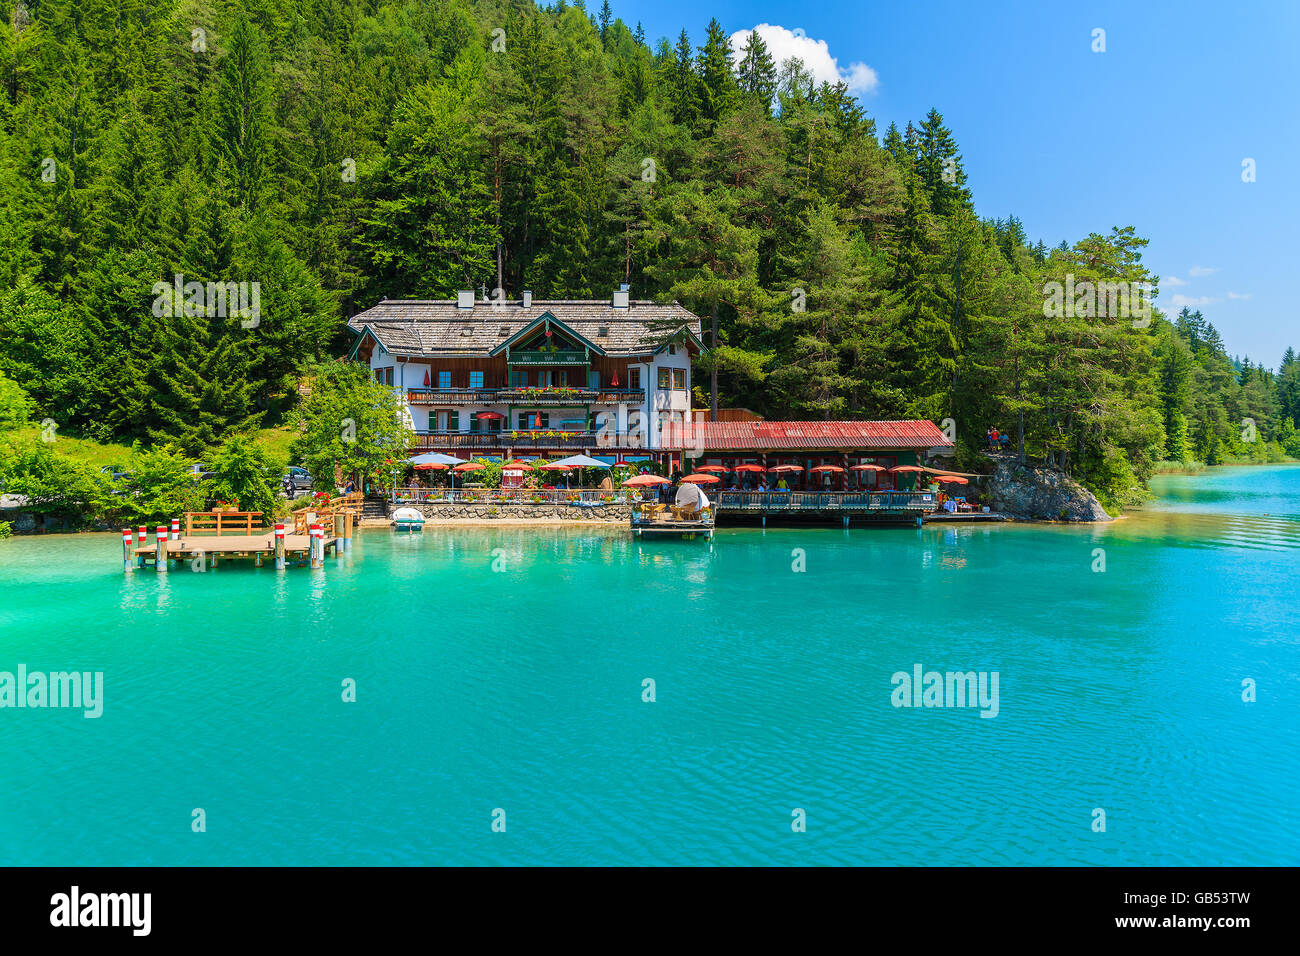 WEISSENSEE LAKE, AUSTRIA - JUL 7, 2015: restaurant and guest house on shore of Weissensee lake in summer time. Weissensee has dr Stock Photo